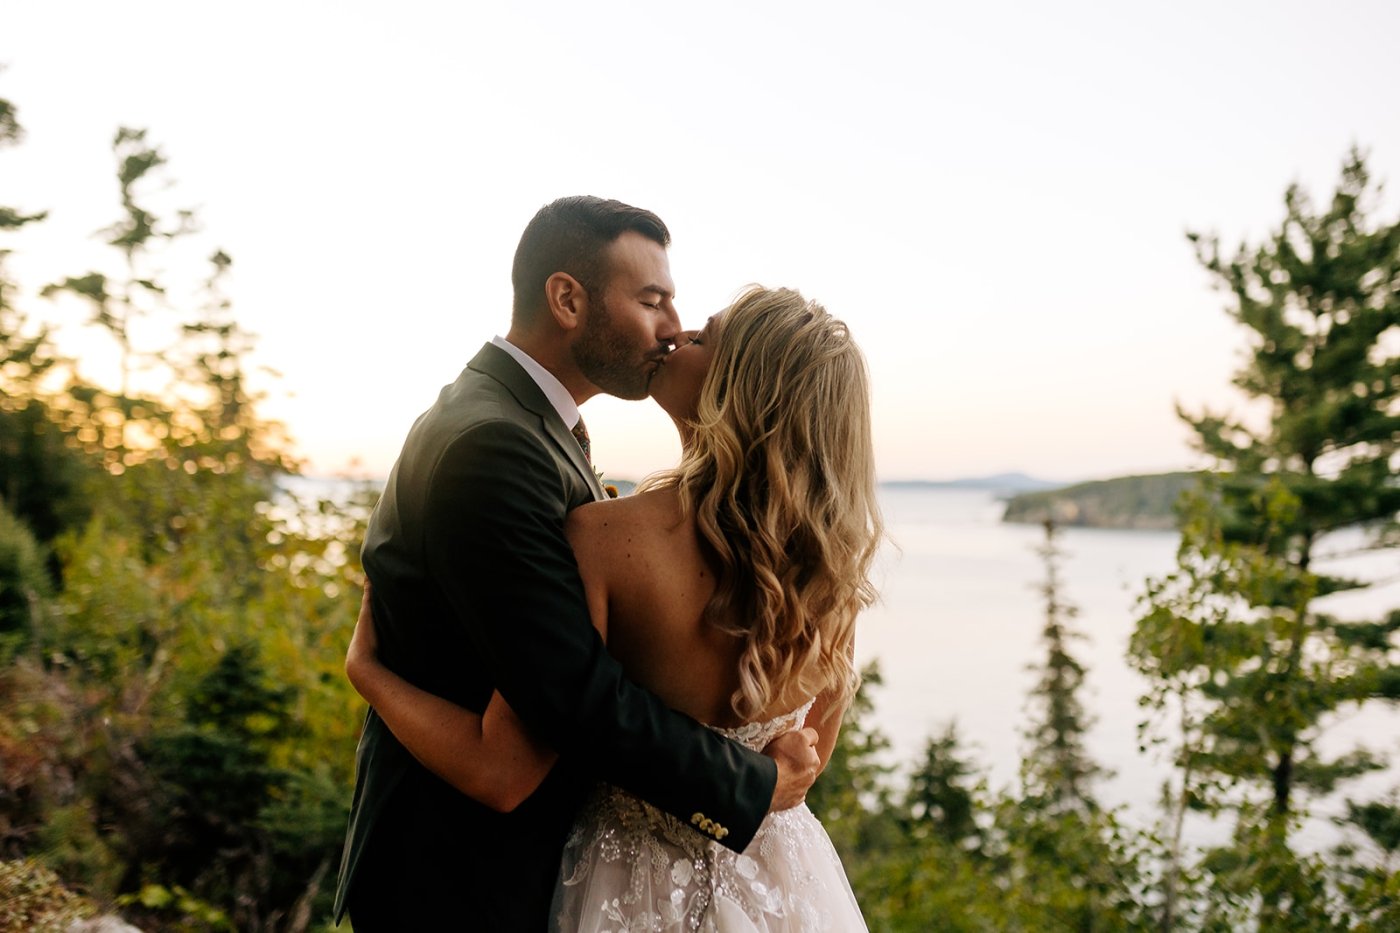 sunset bride and groom portraits